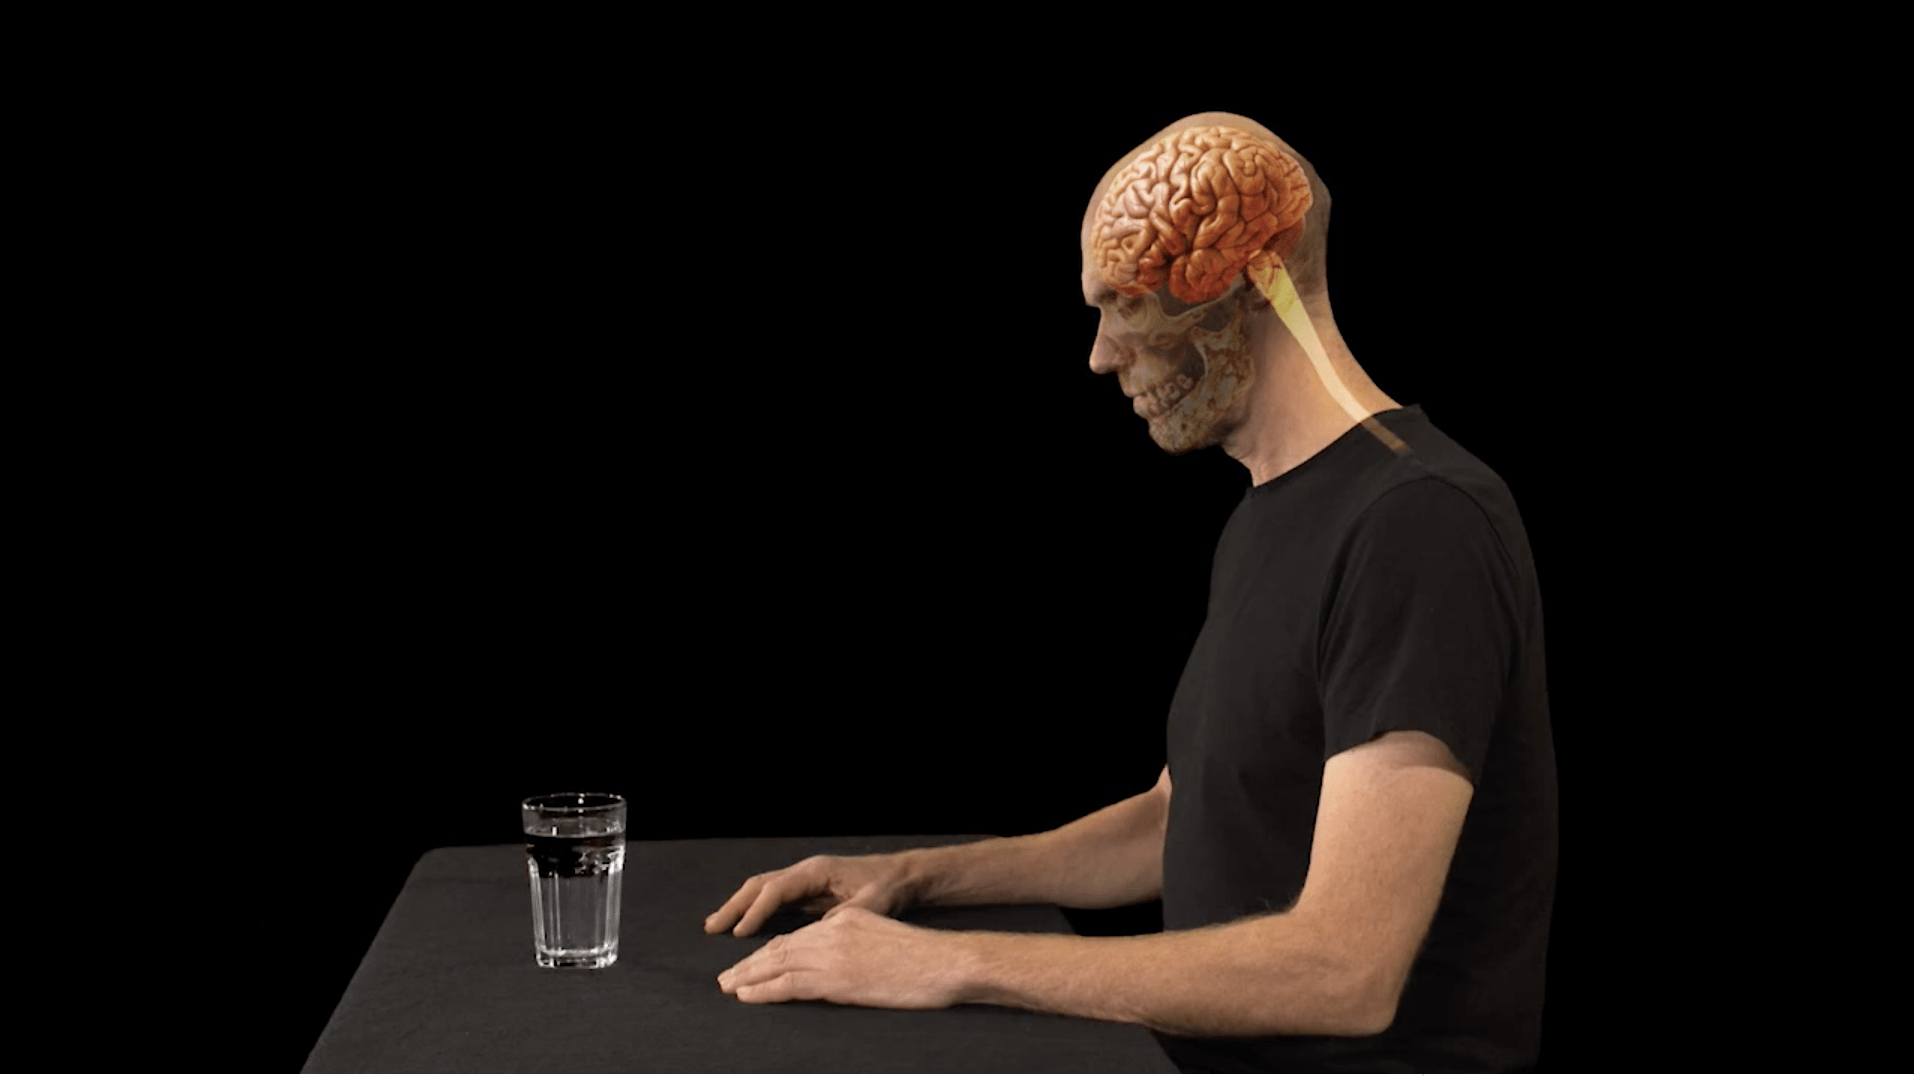 Animation frame of a persons brain looking at a glass of water